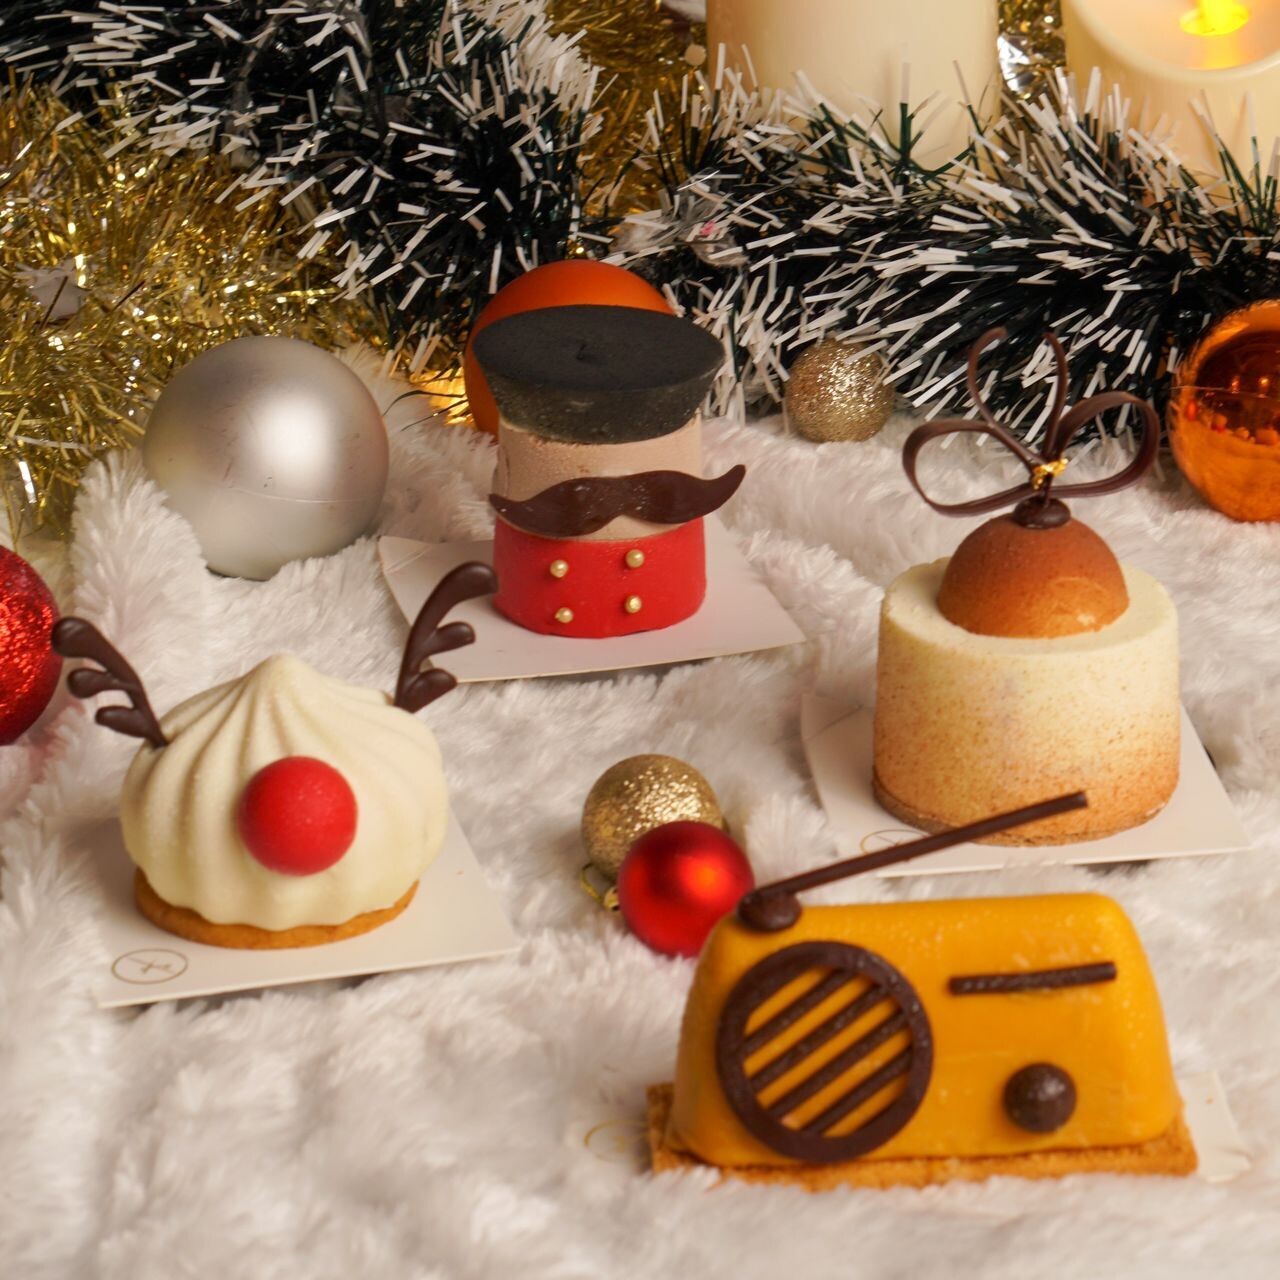 10 Pretty Christmas Desserts & Gift Sets To Make Your Guests Go 'Ooh So Cute How To Eat'